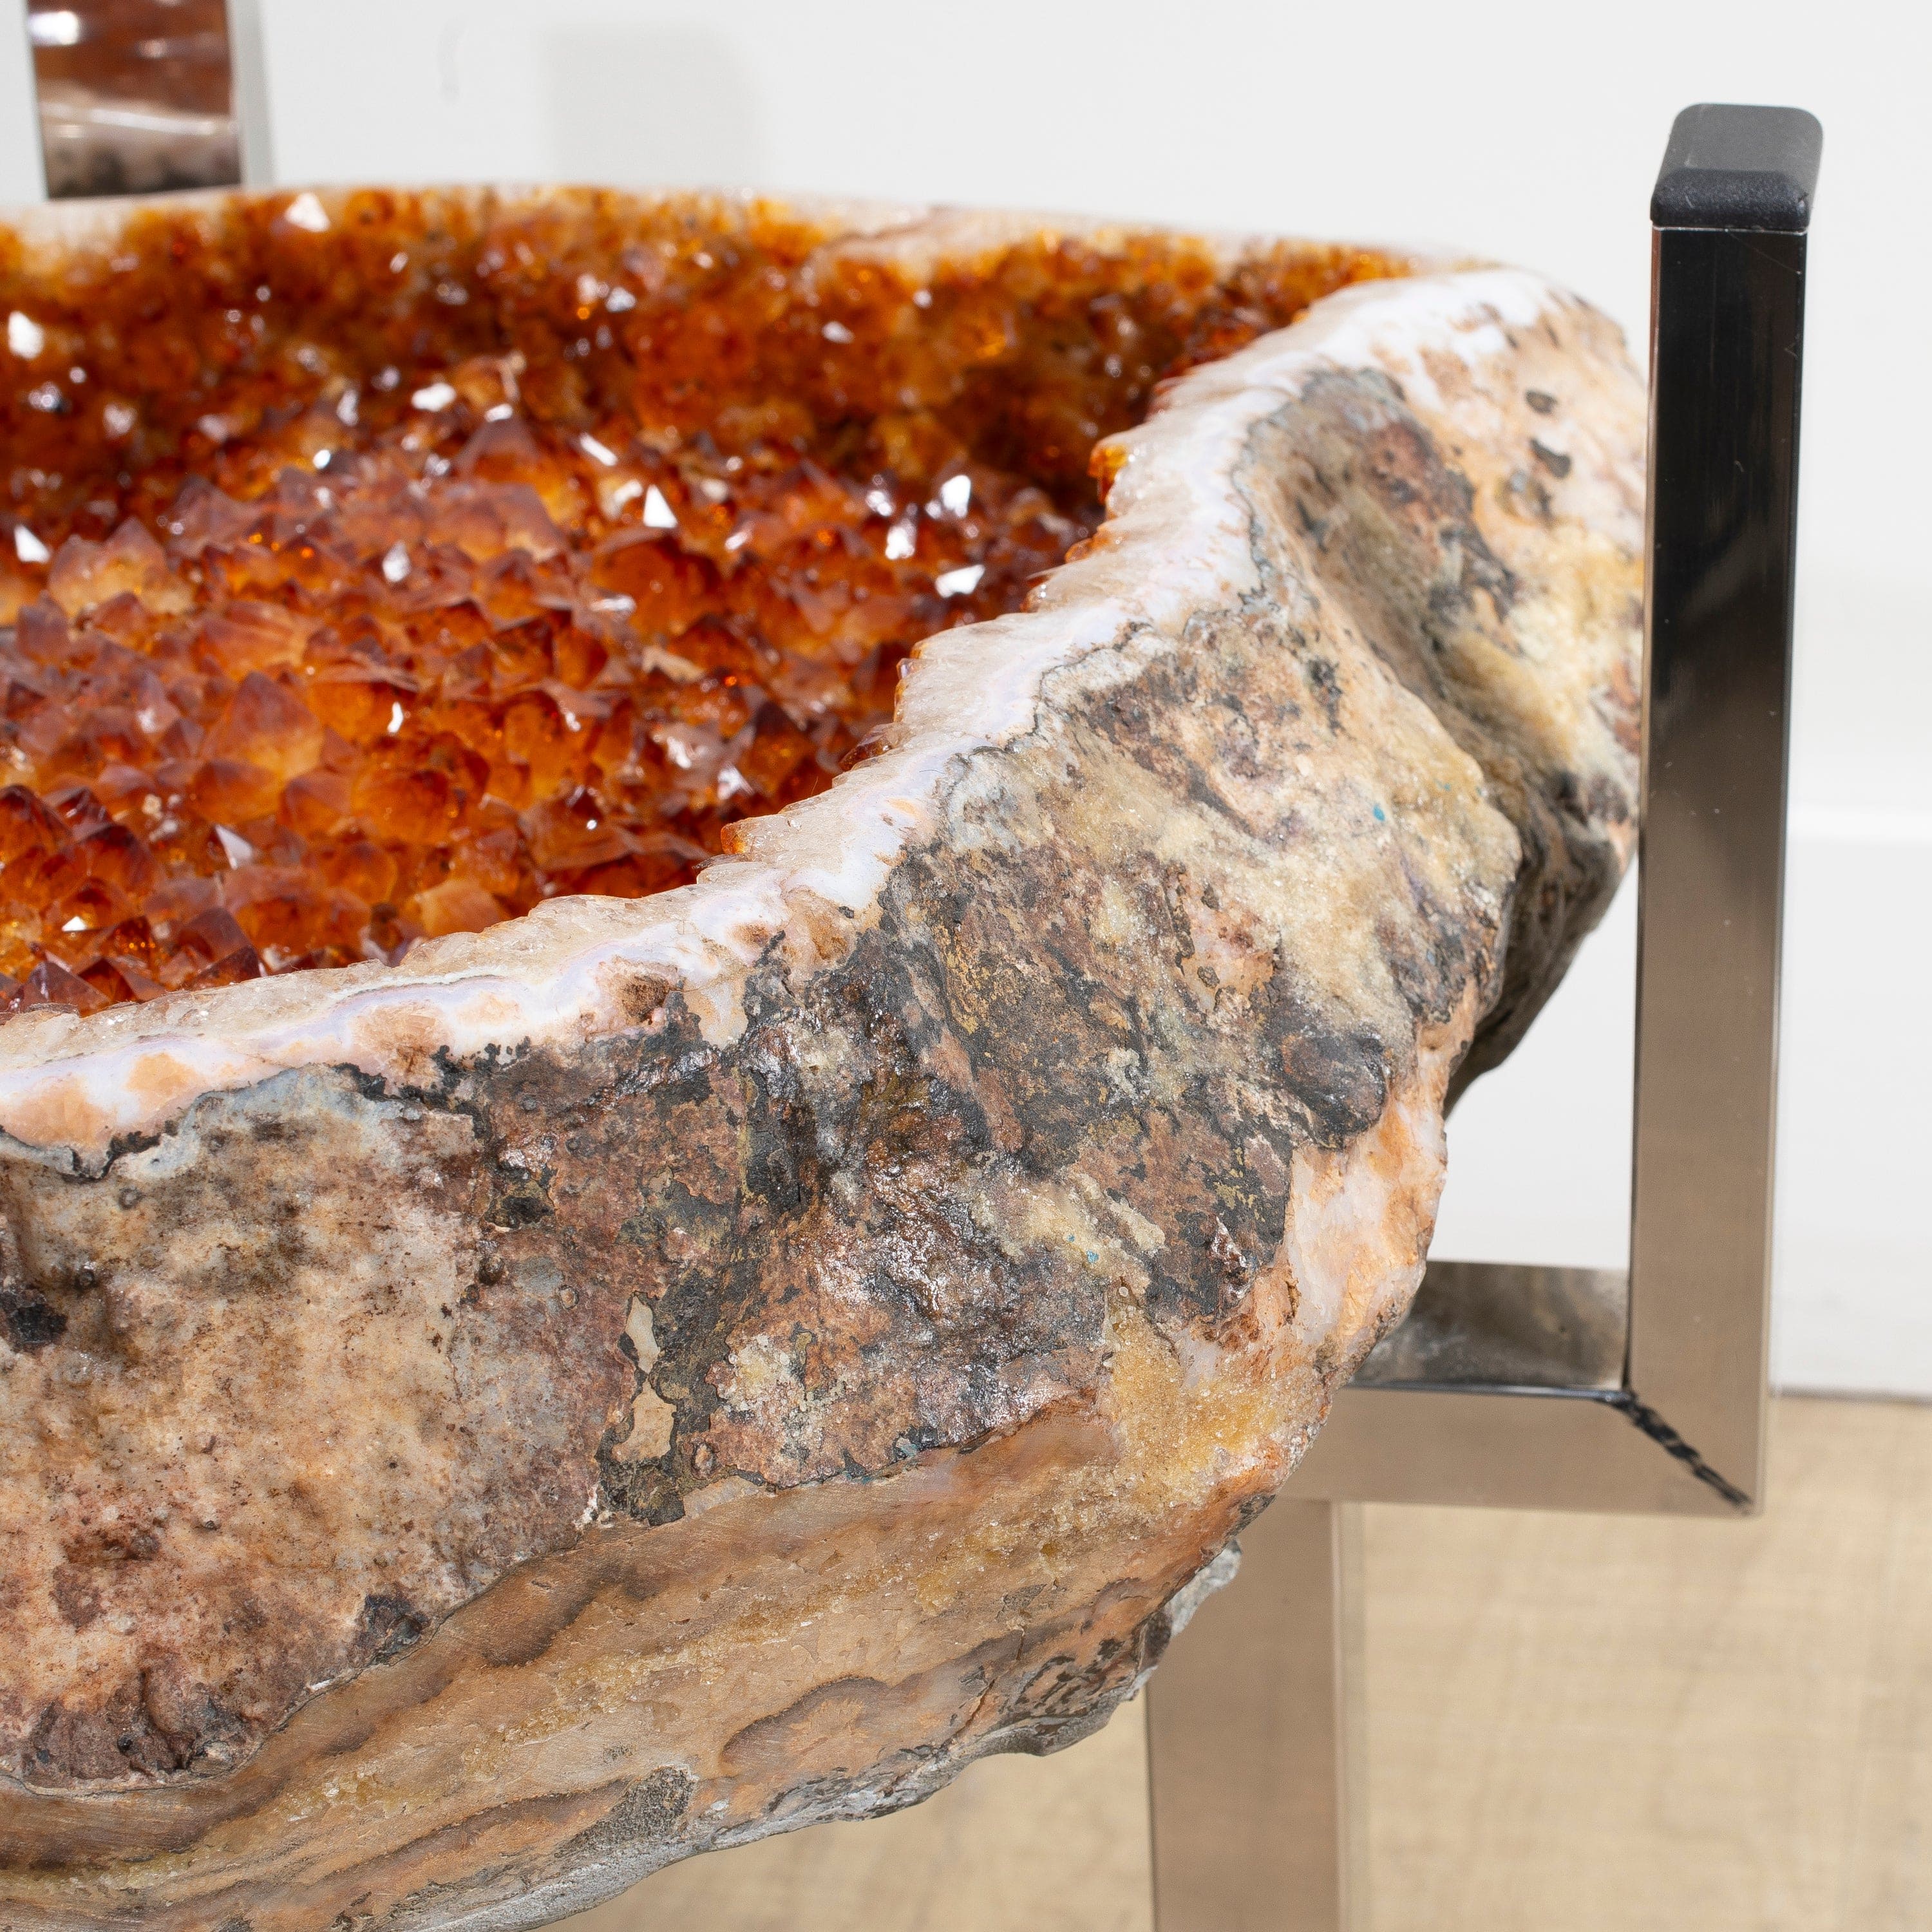 Kalifano Citrine Citrine Geode Table from Brazil on Custom Stand - 24" / 73 lbs BCG8000.008